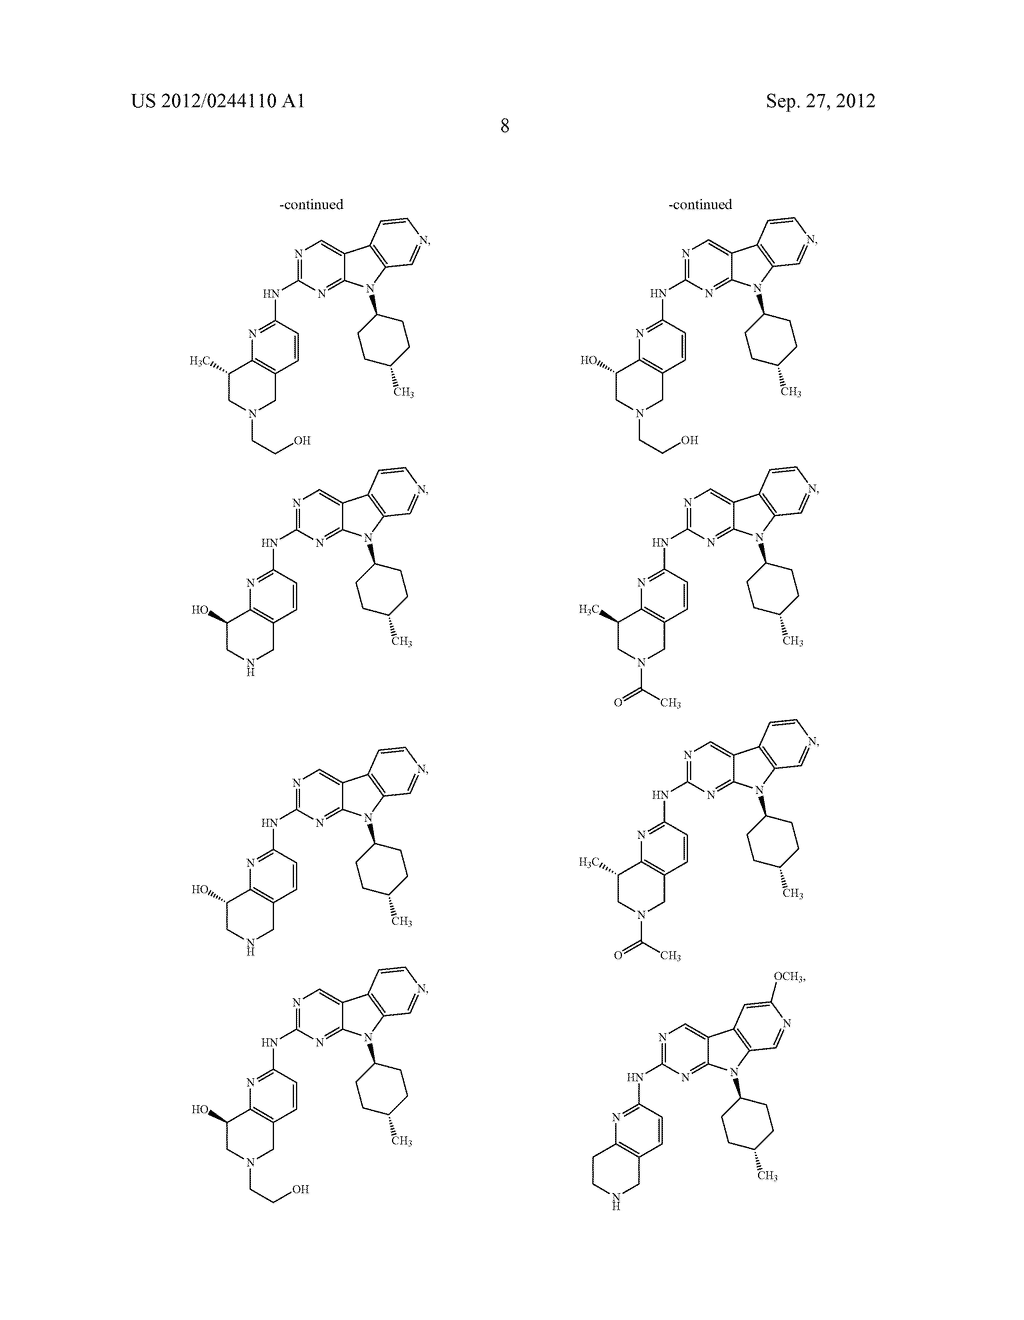 FUSED TRICYCLIC DUAL INHIBITORS OF CDK 4/6 AND FLT3 - diagram, schematic, and image 12